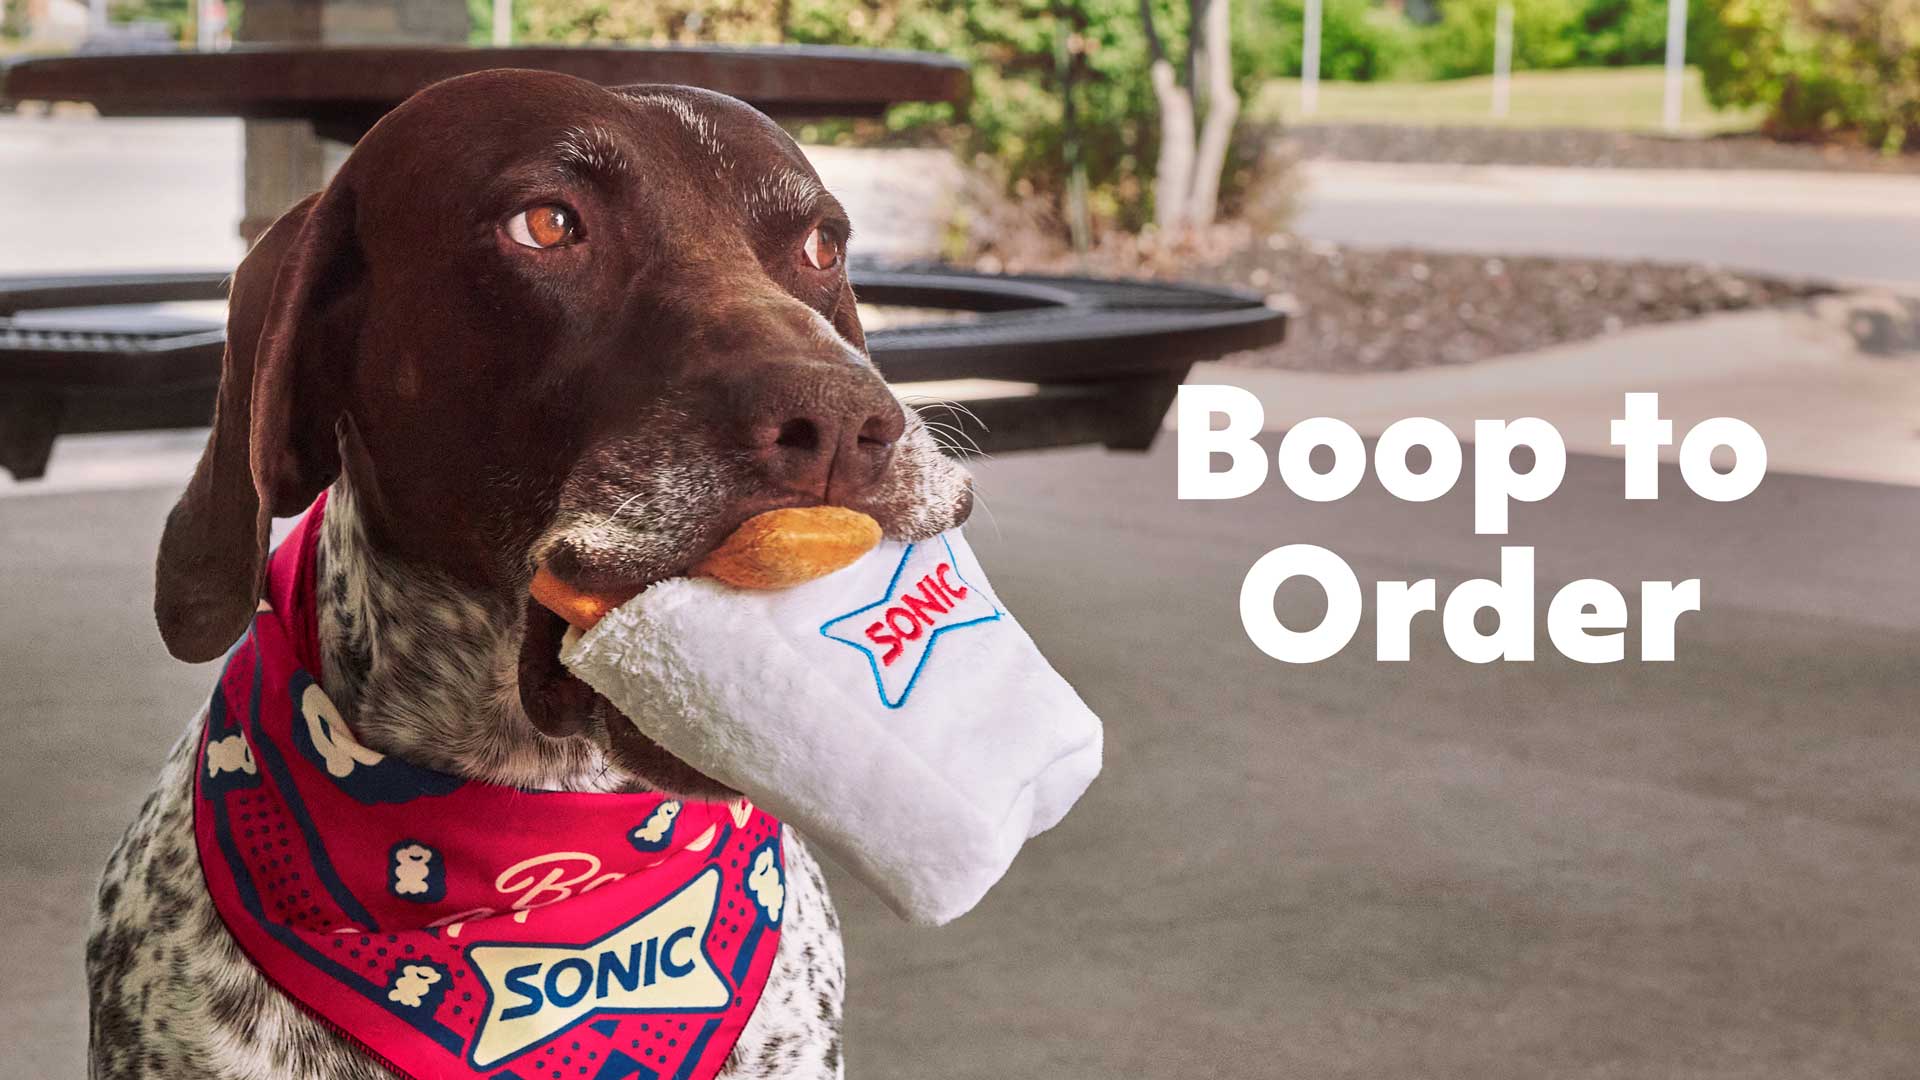 Close up of dog wearing SONIC bandana gripping SONIC tots toy in its mouth on a SONIC patio.